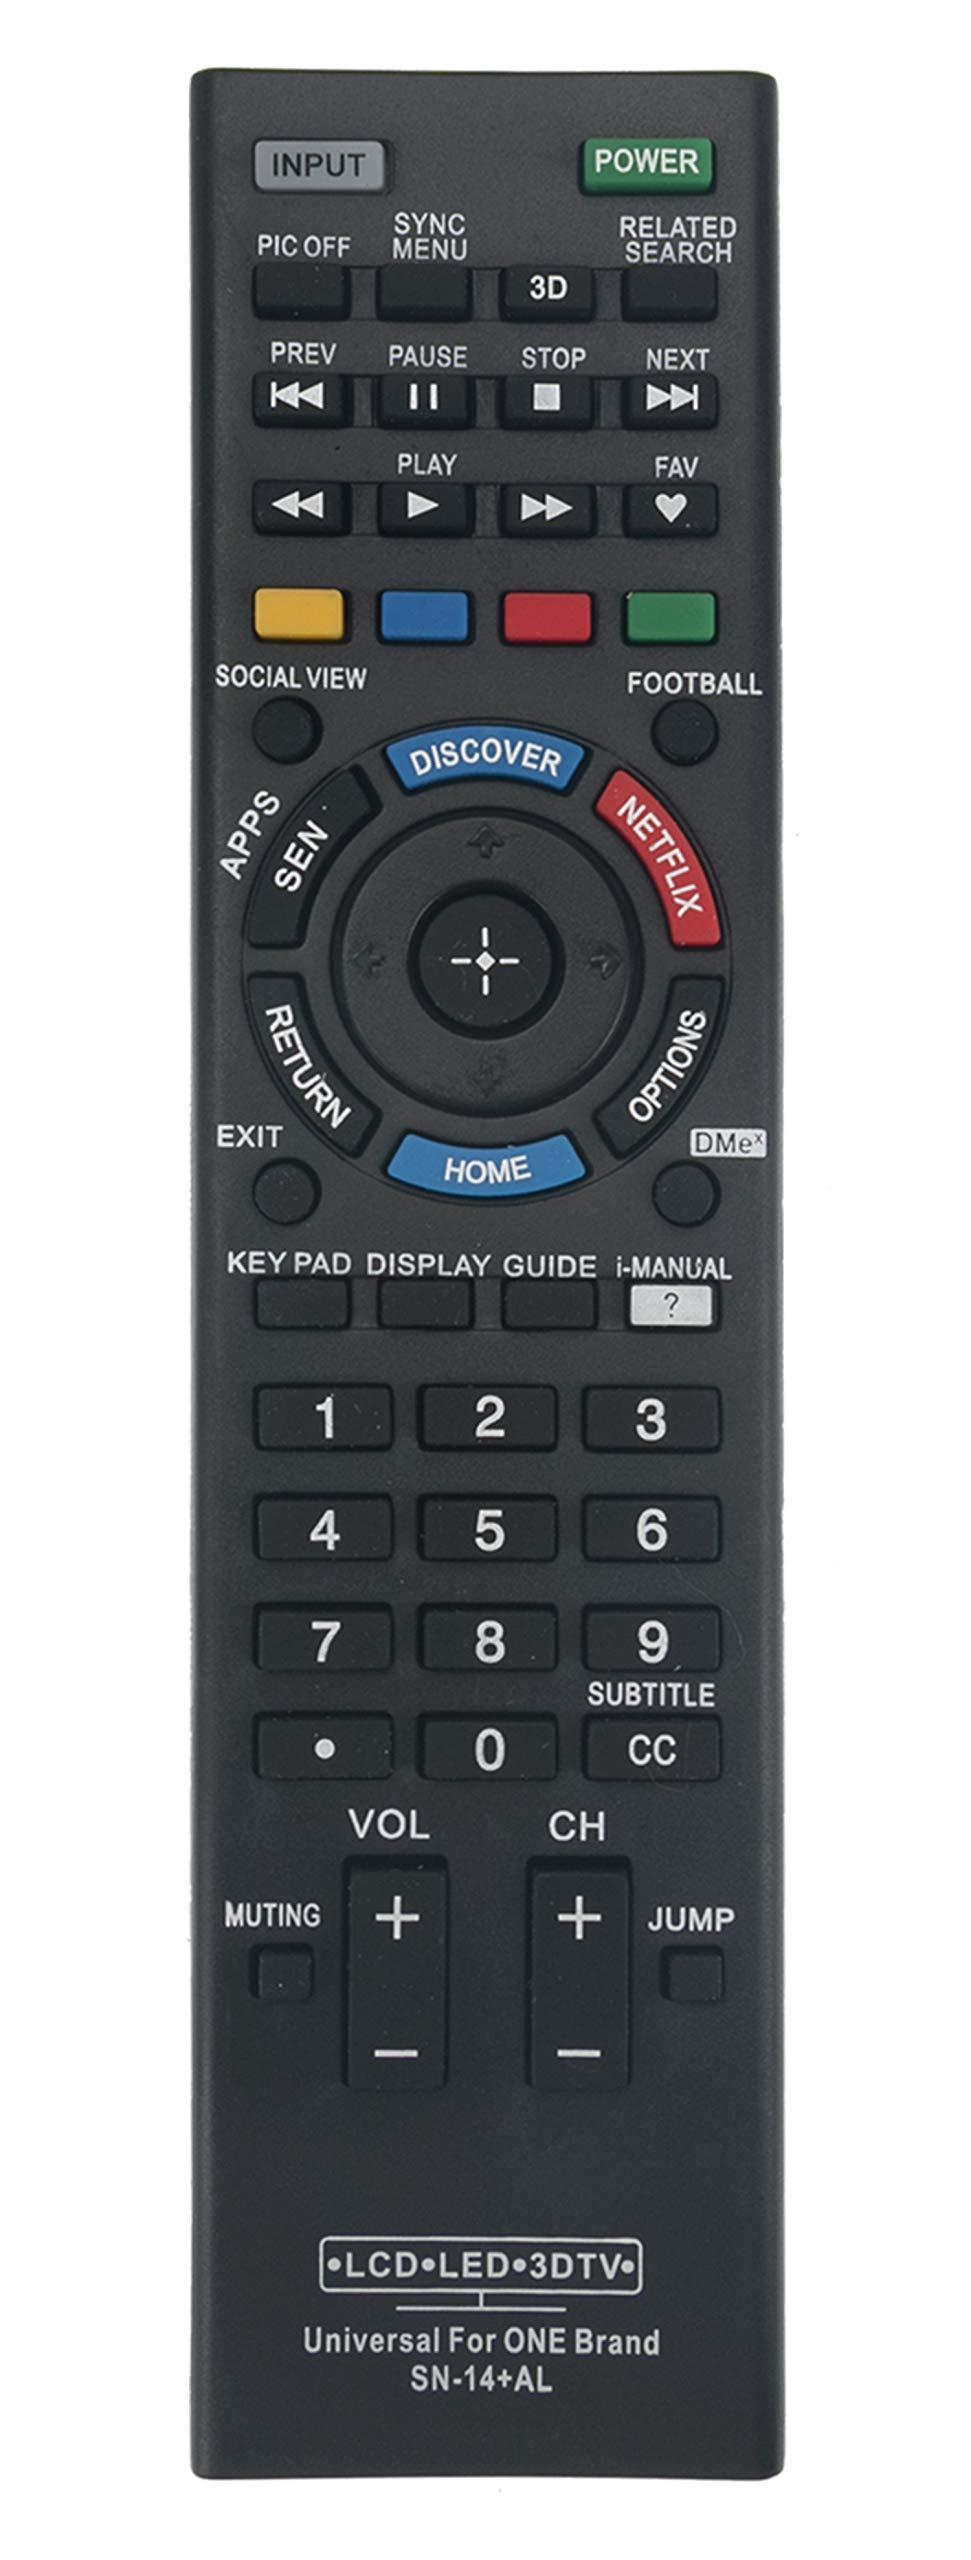 Universal Remote Replacement fit for Almost All Sony TV LCD LED HDTV Smart Bravia TV